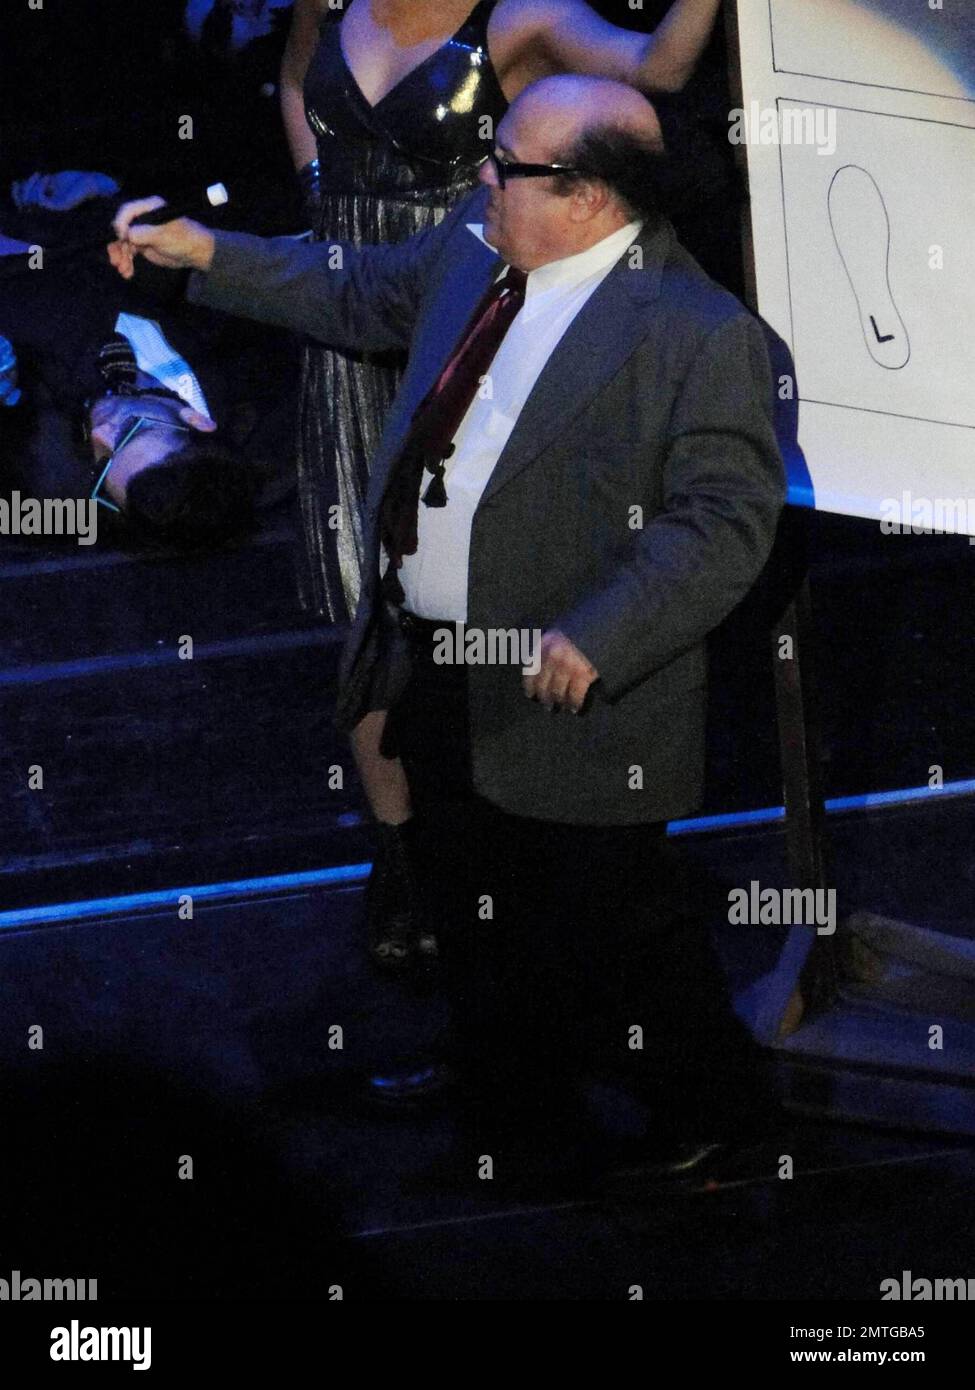 Danny DeVito performs in the one-night-only, star-studded 35th Anniversary Tribute and Costume Ball for 'The Rocky Horror Picture Show' at The Wiltern. The event, produced by Lou Adler and Kevin Duncan and directed by Kenny Ortega, benefited The Painted Turtle, one of Paul Newman's Hole in the Wall Gang Camps, which provides children throughout California who suffer from chronic and life-threatening illnesses the opportunity to rediscover the ordinary joys of being a child through a year-round camp and hospital outreach programs. Los Angeles, CA. 10/28/10.  . Stock Photo